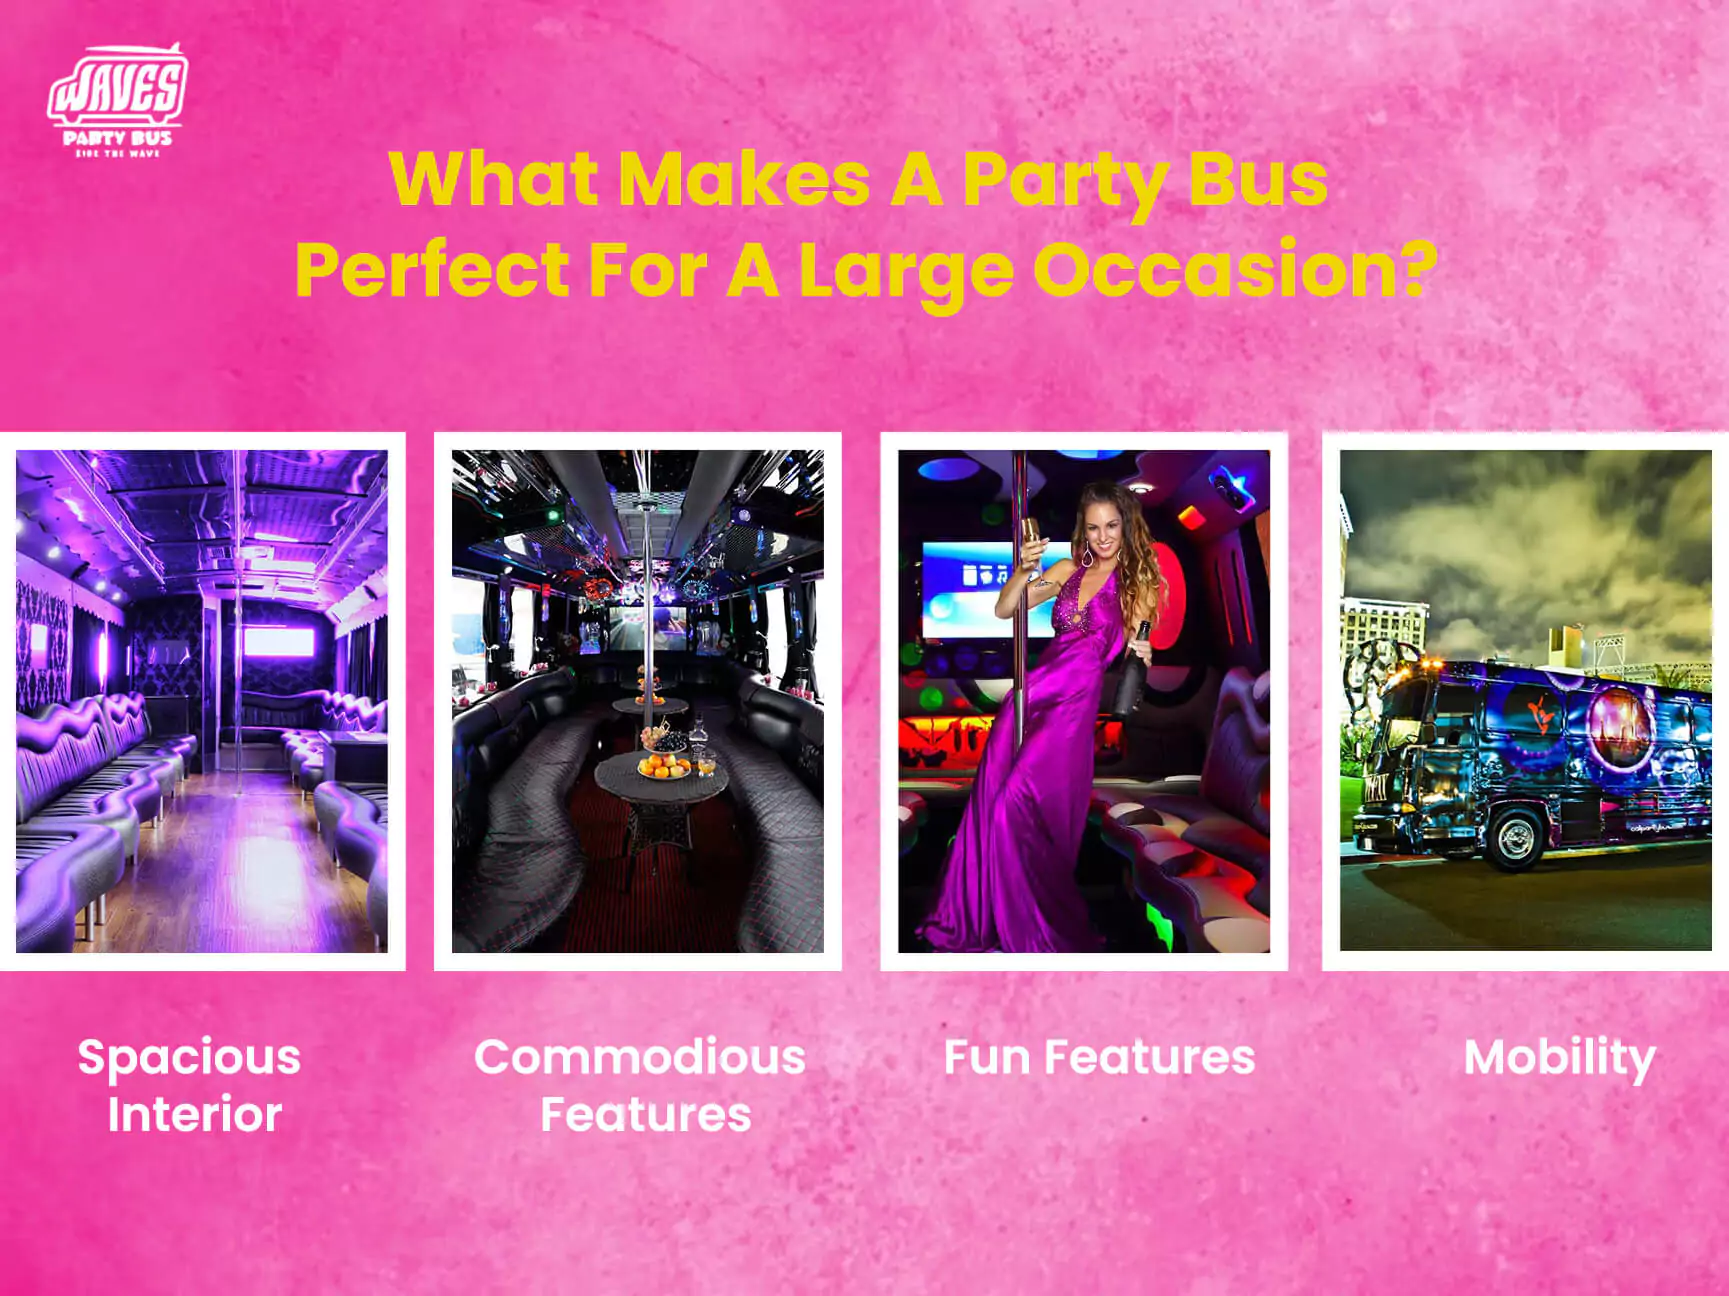 What Makes A Party Bus Perfect For A Large Occasion?